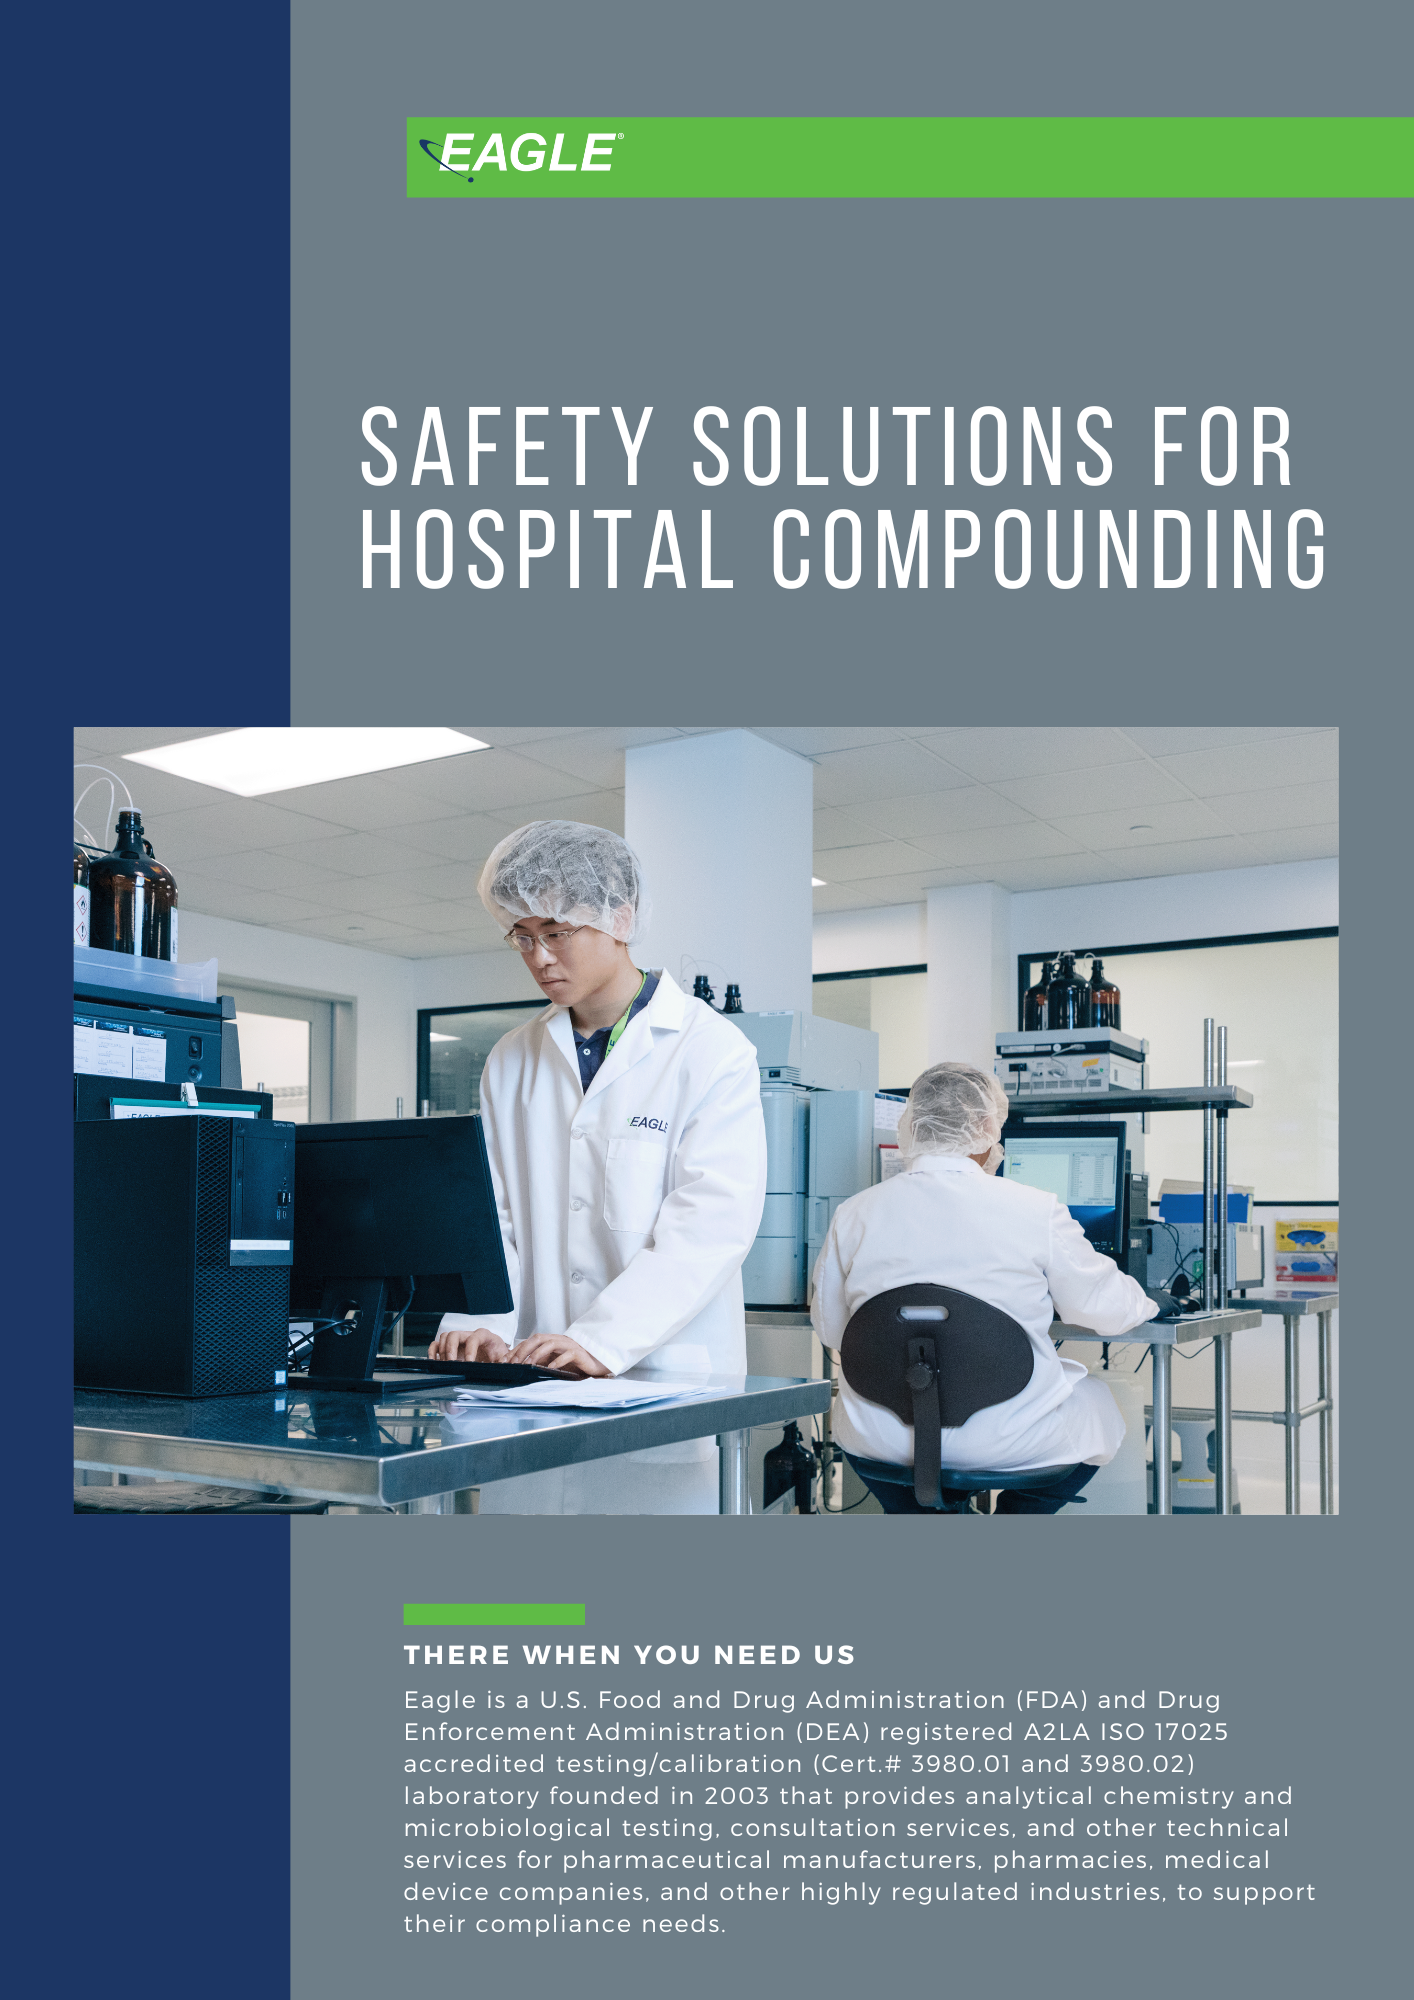 Eagle's Safety Solutions For Hospital Compounding cover page.